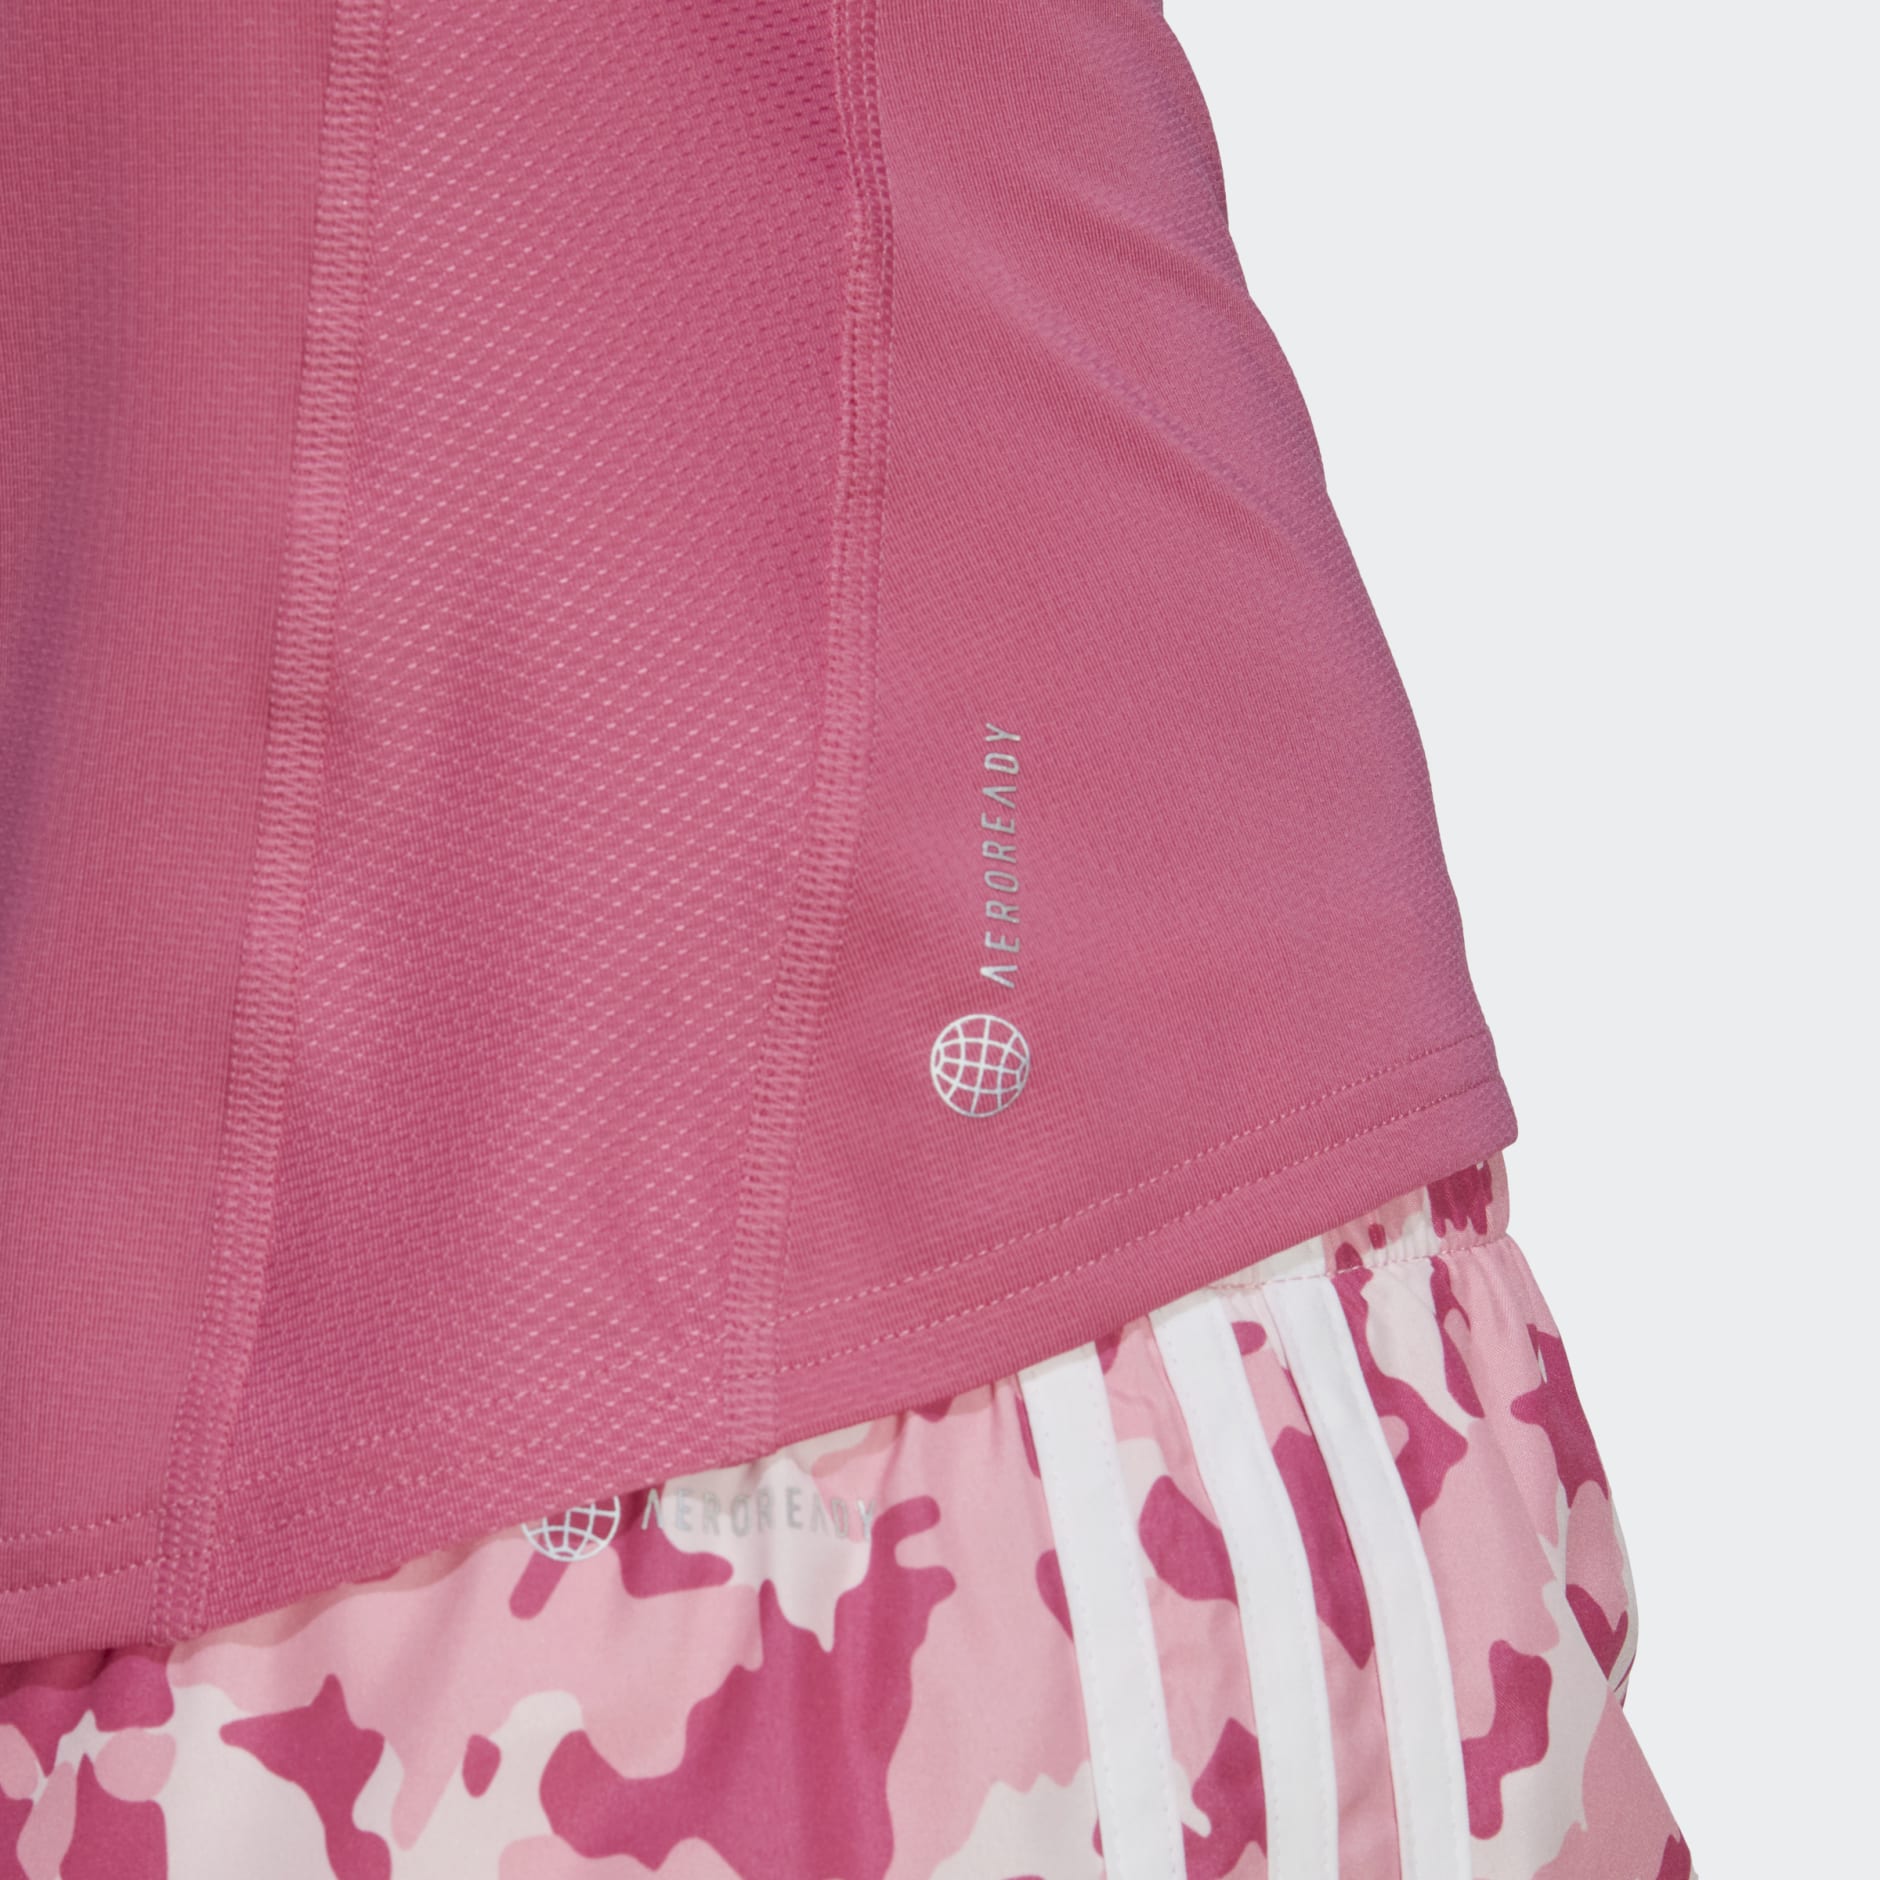 Clothing - Own the Run Running Tank Top - Pink | adidas South Africa